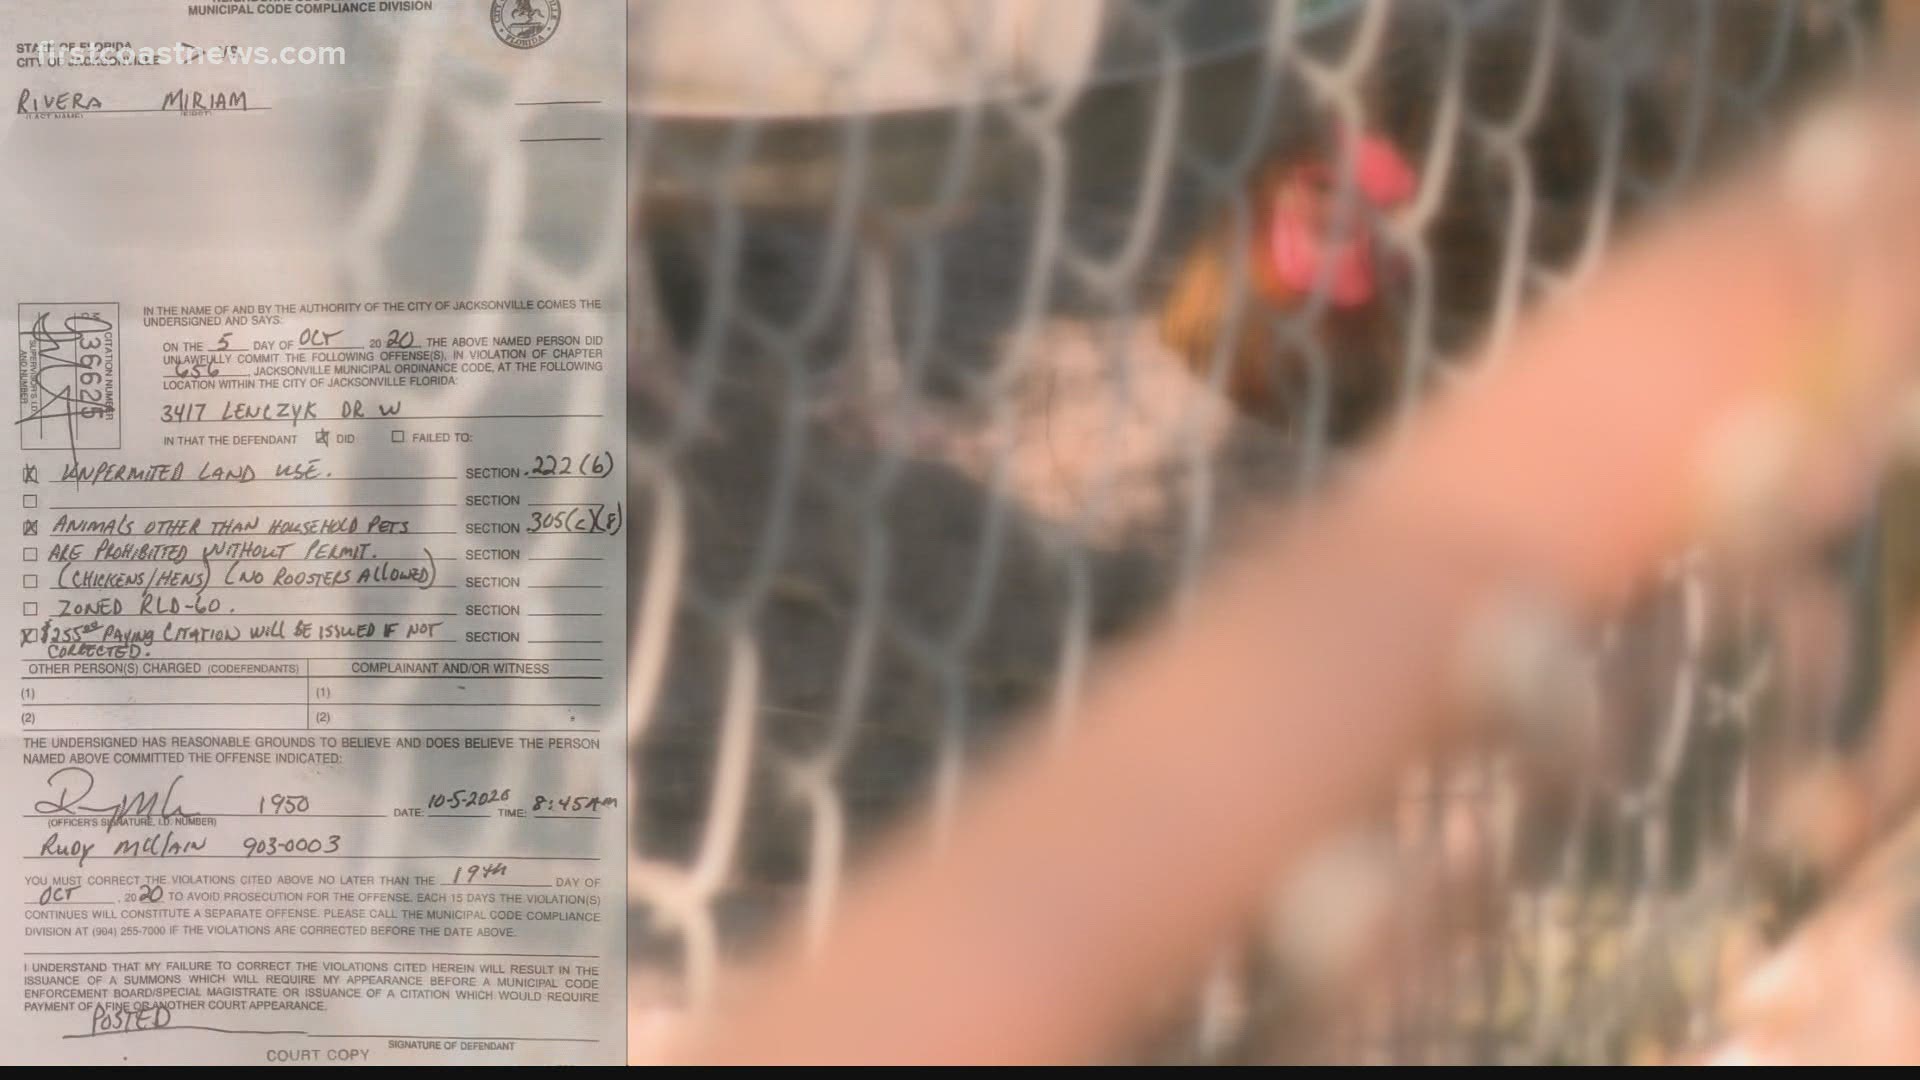 The City of Jacksonville sent a code enforcement citation to a new resident at a home because she has chickens without a permit.